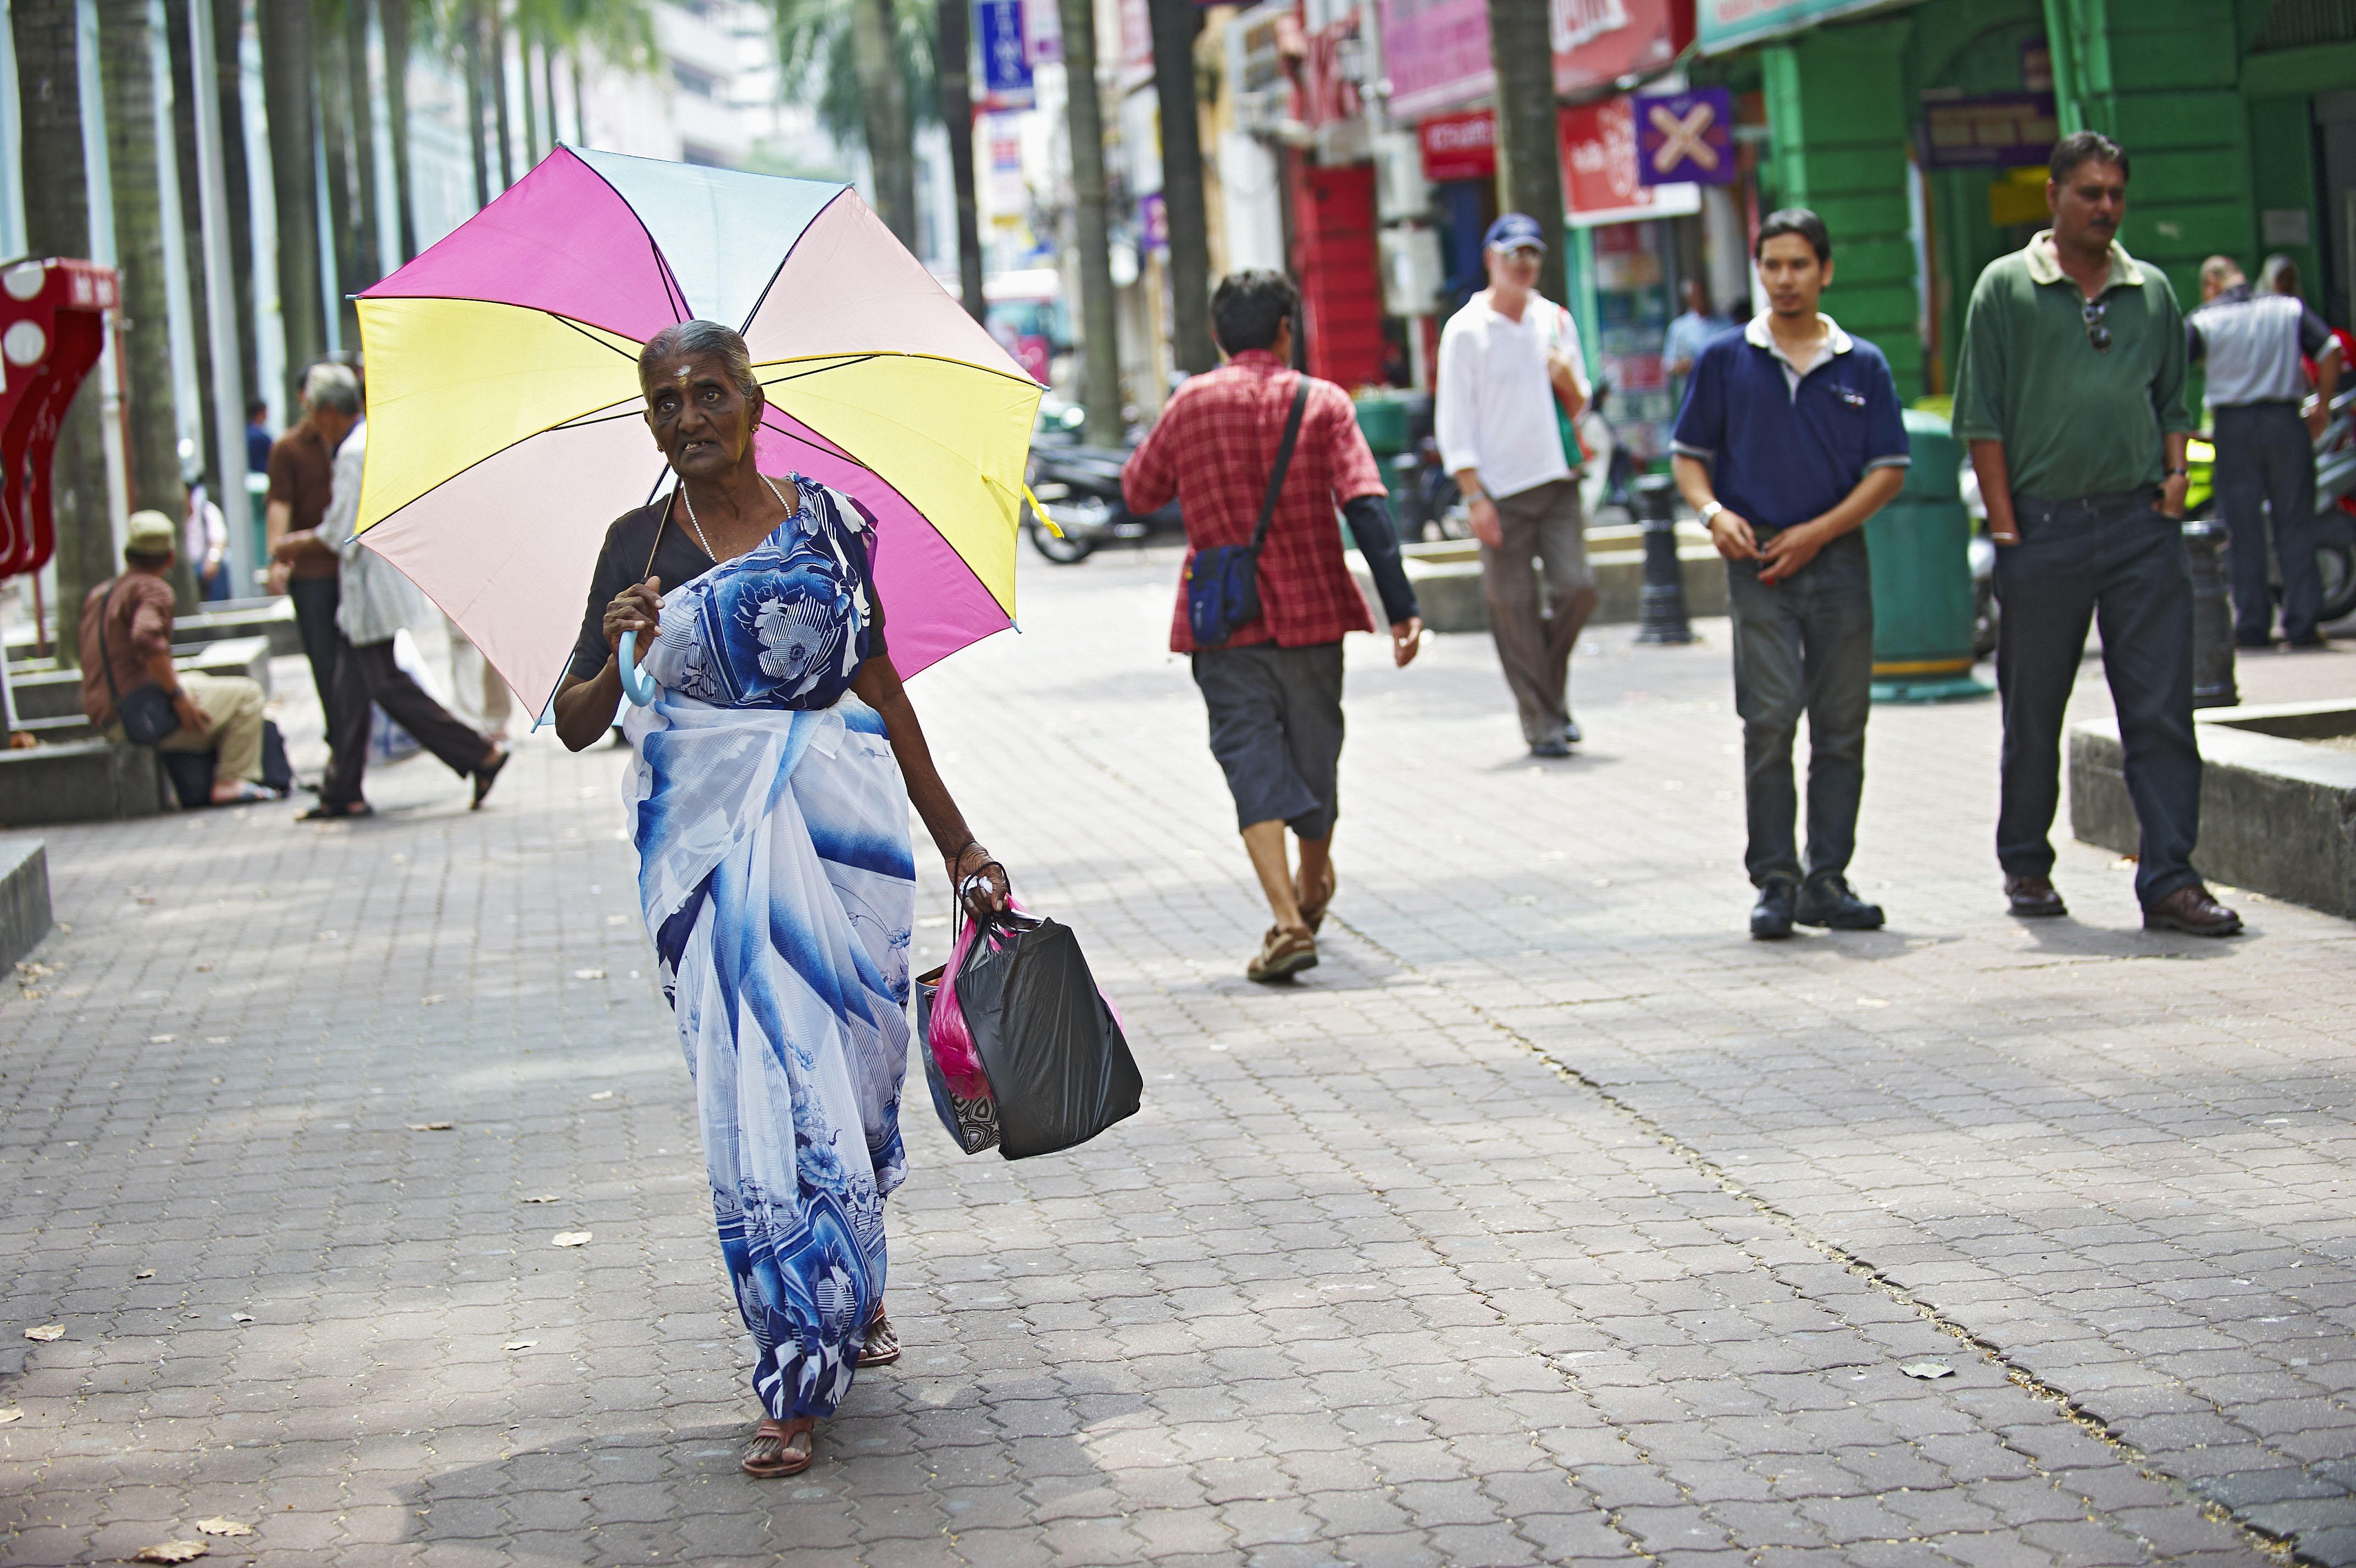 People from Africa and South Asia often struggle with racism in Malaysia. Photo: Alamy